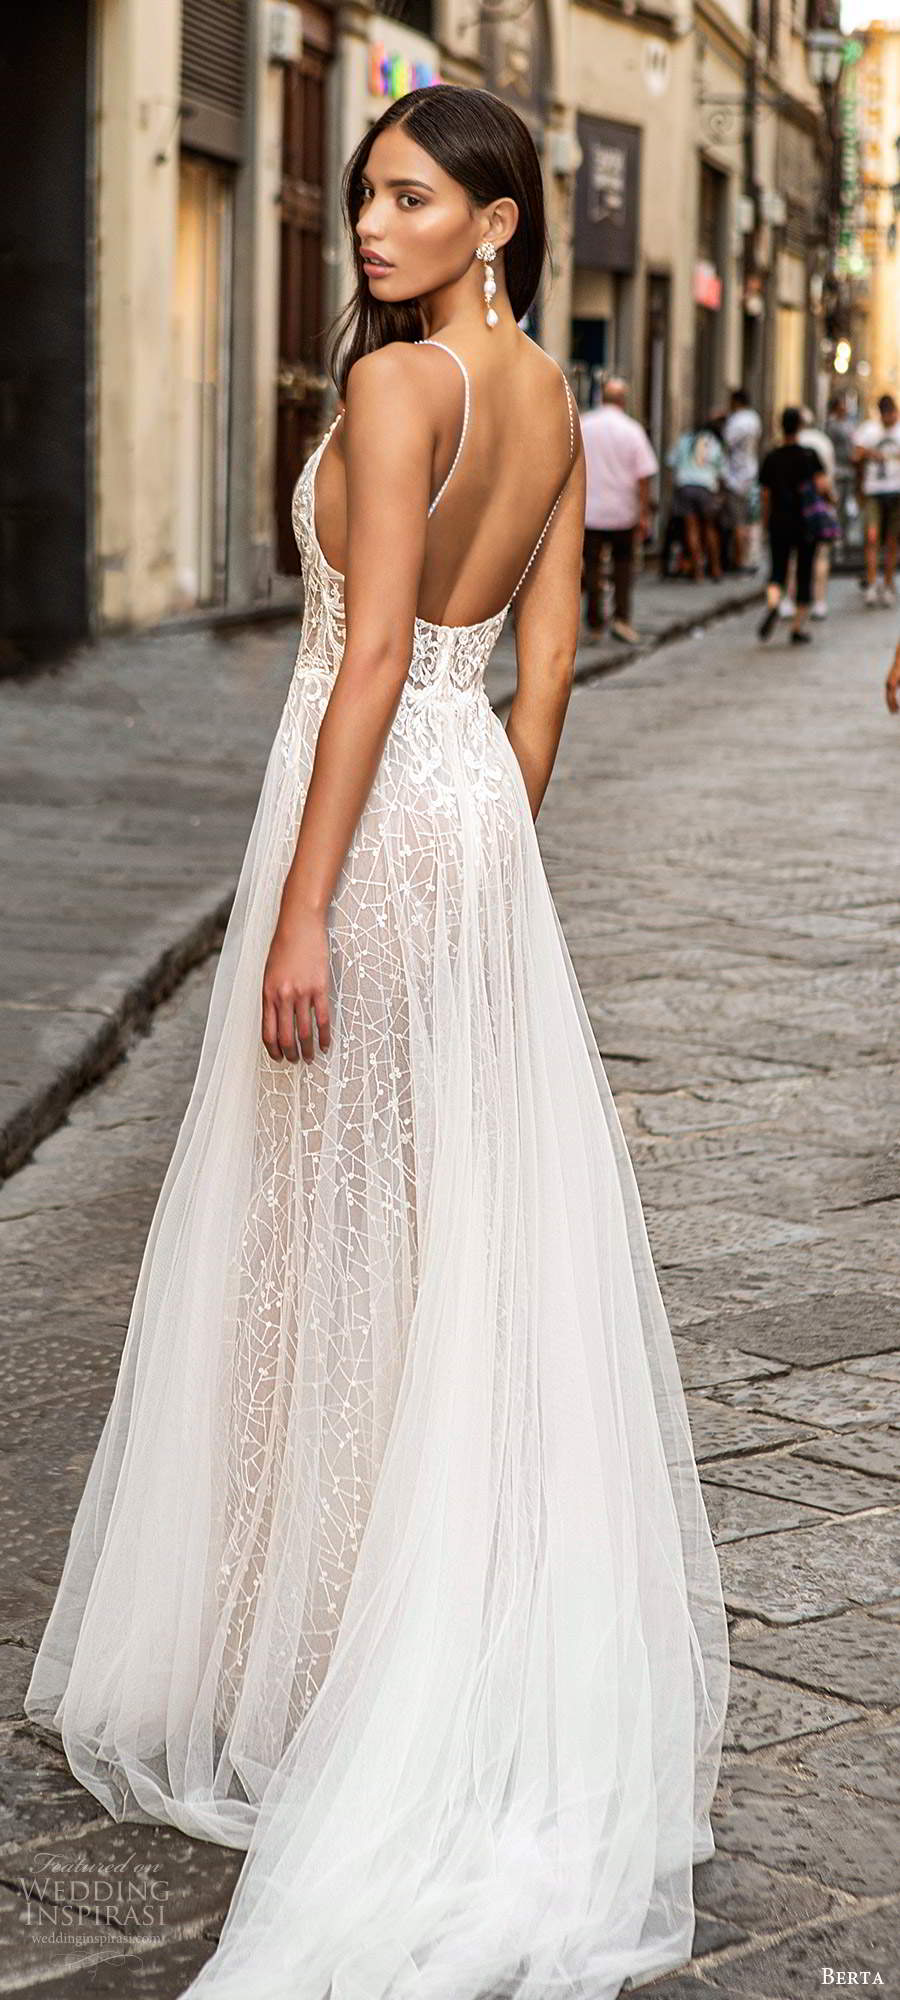 berta fall 2020 muse bridal sleeveless thin straps v neckline fully embellished lace a line ball gown wedding dress chapel train (13) bv